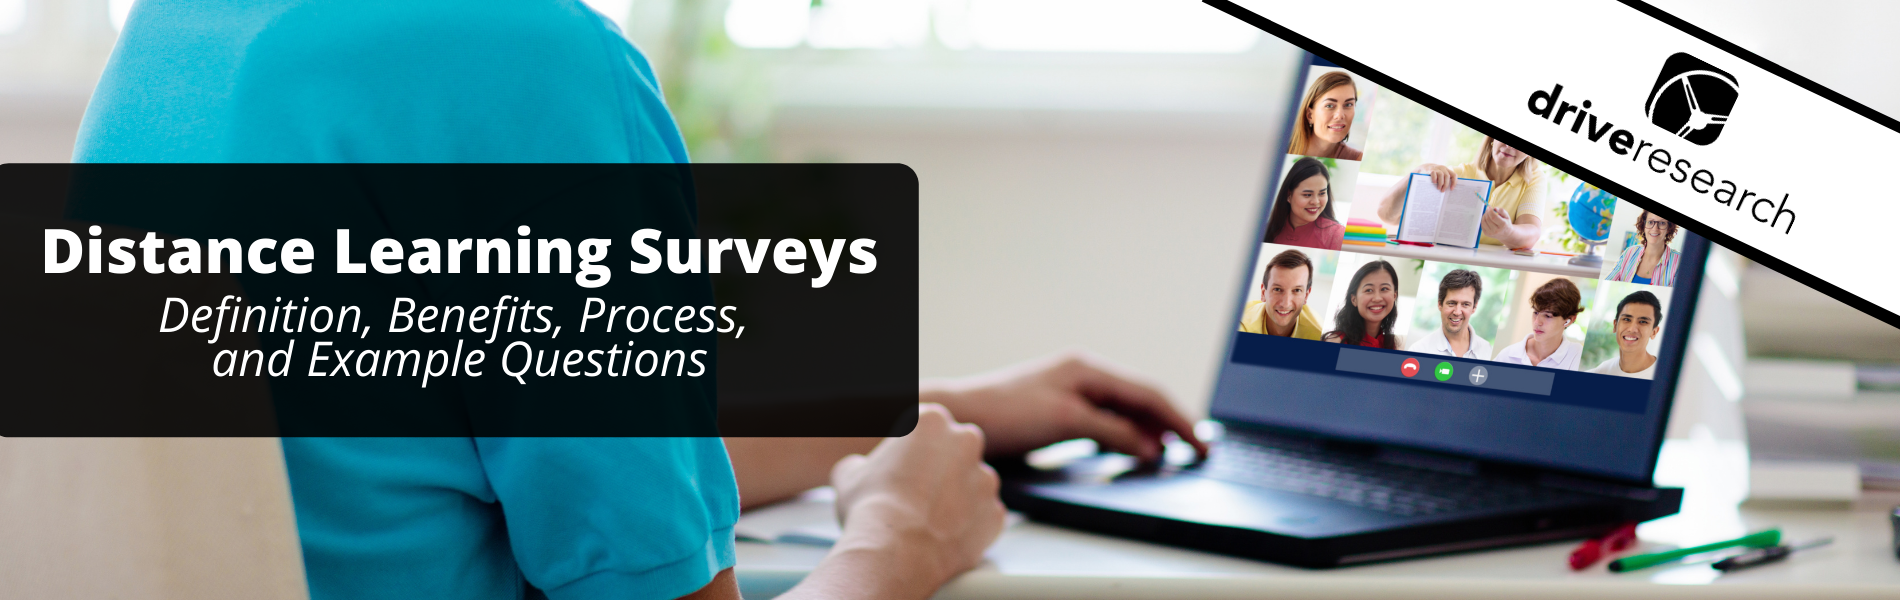 8 Steps to Conducting Distance Learning Surveys | Market Research Company